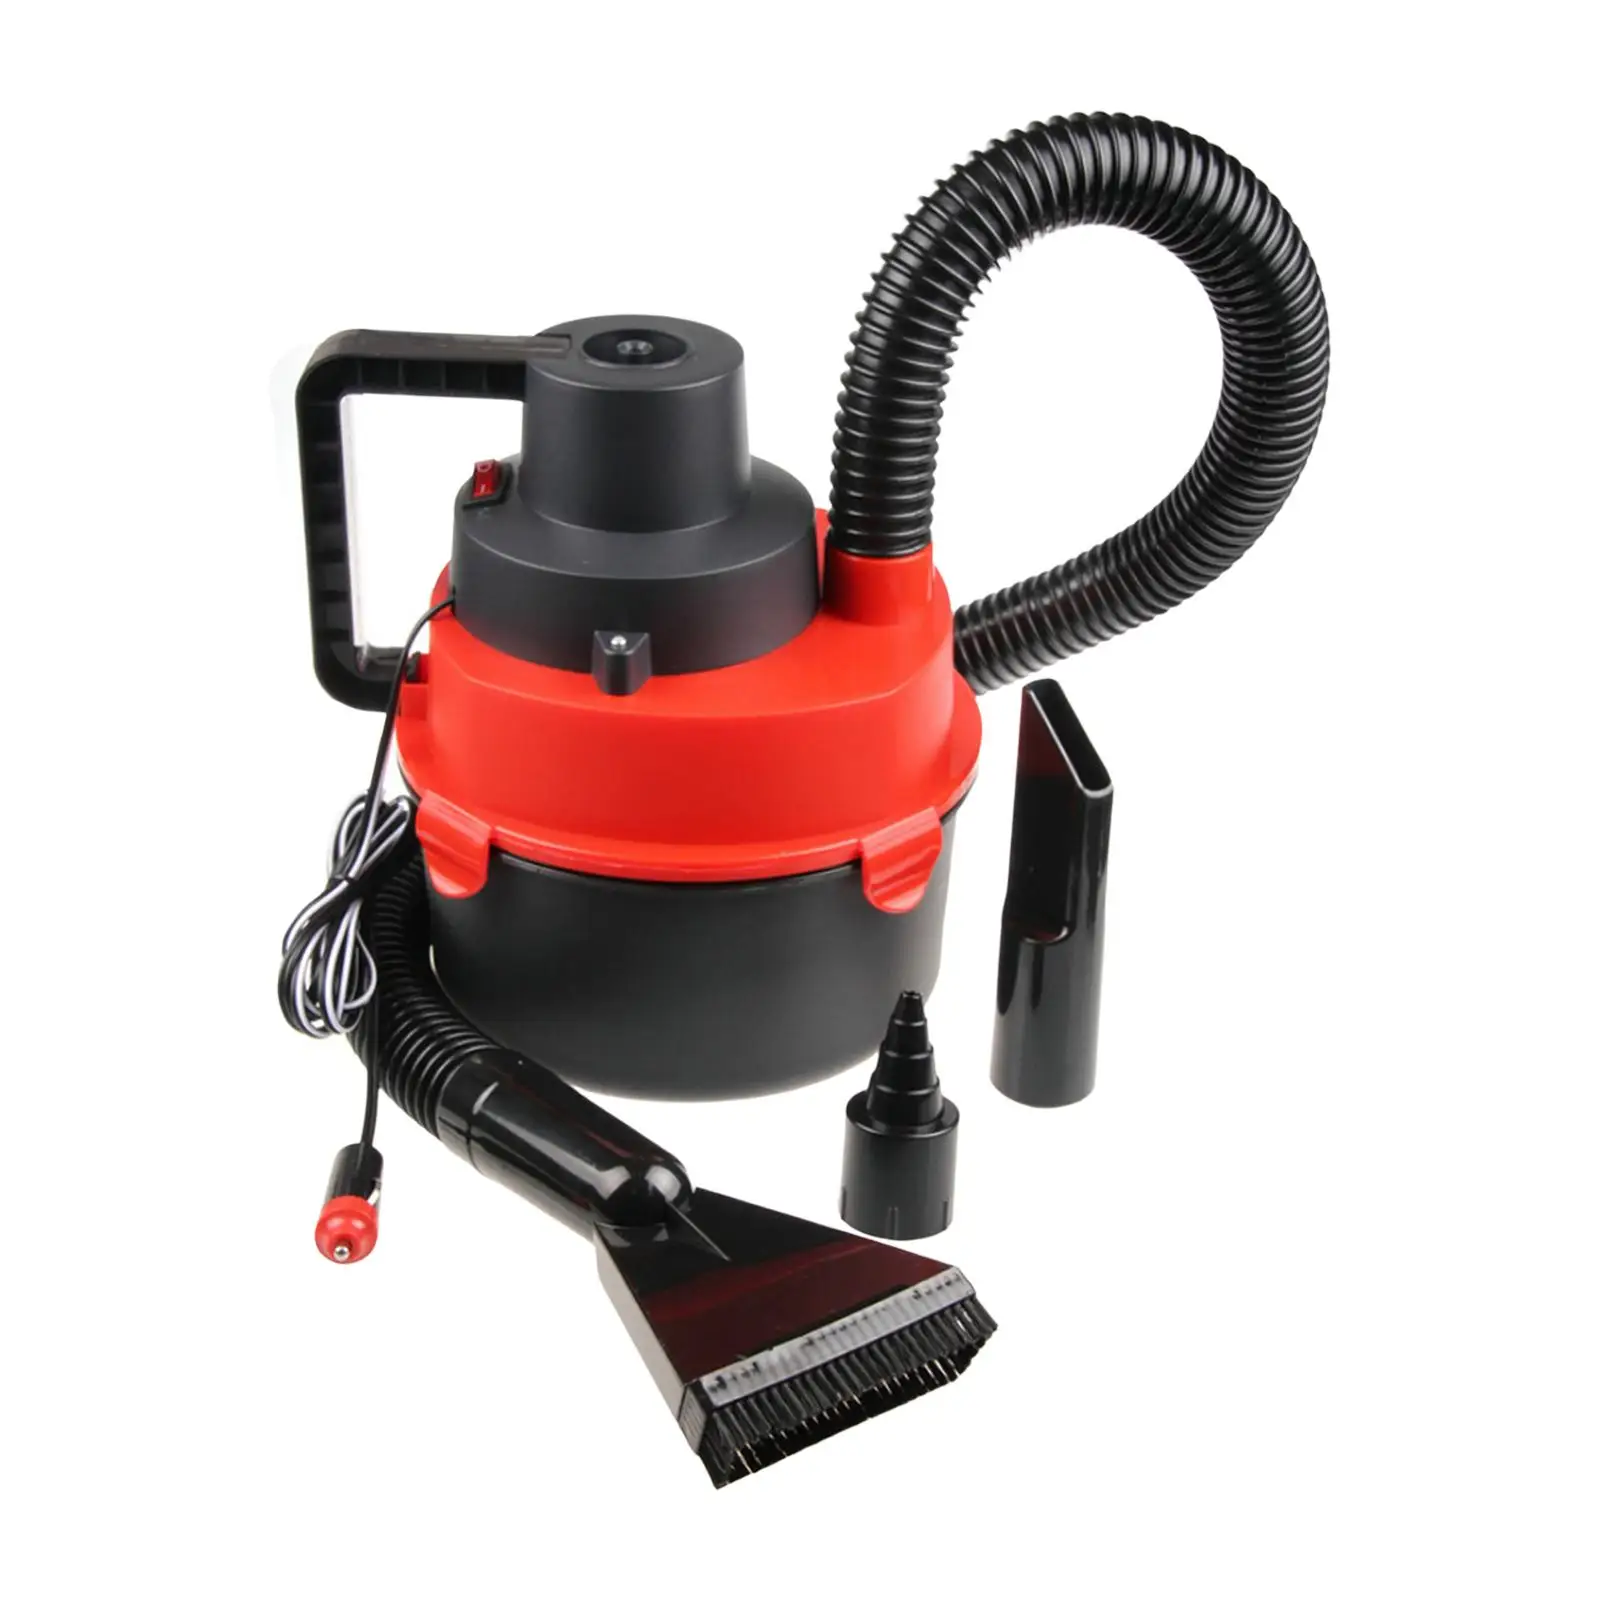 12V Wet/Dry Car Canister Vacuum Wet or Dry Pickup for Spills and Mud Compact